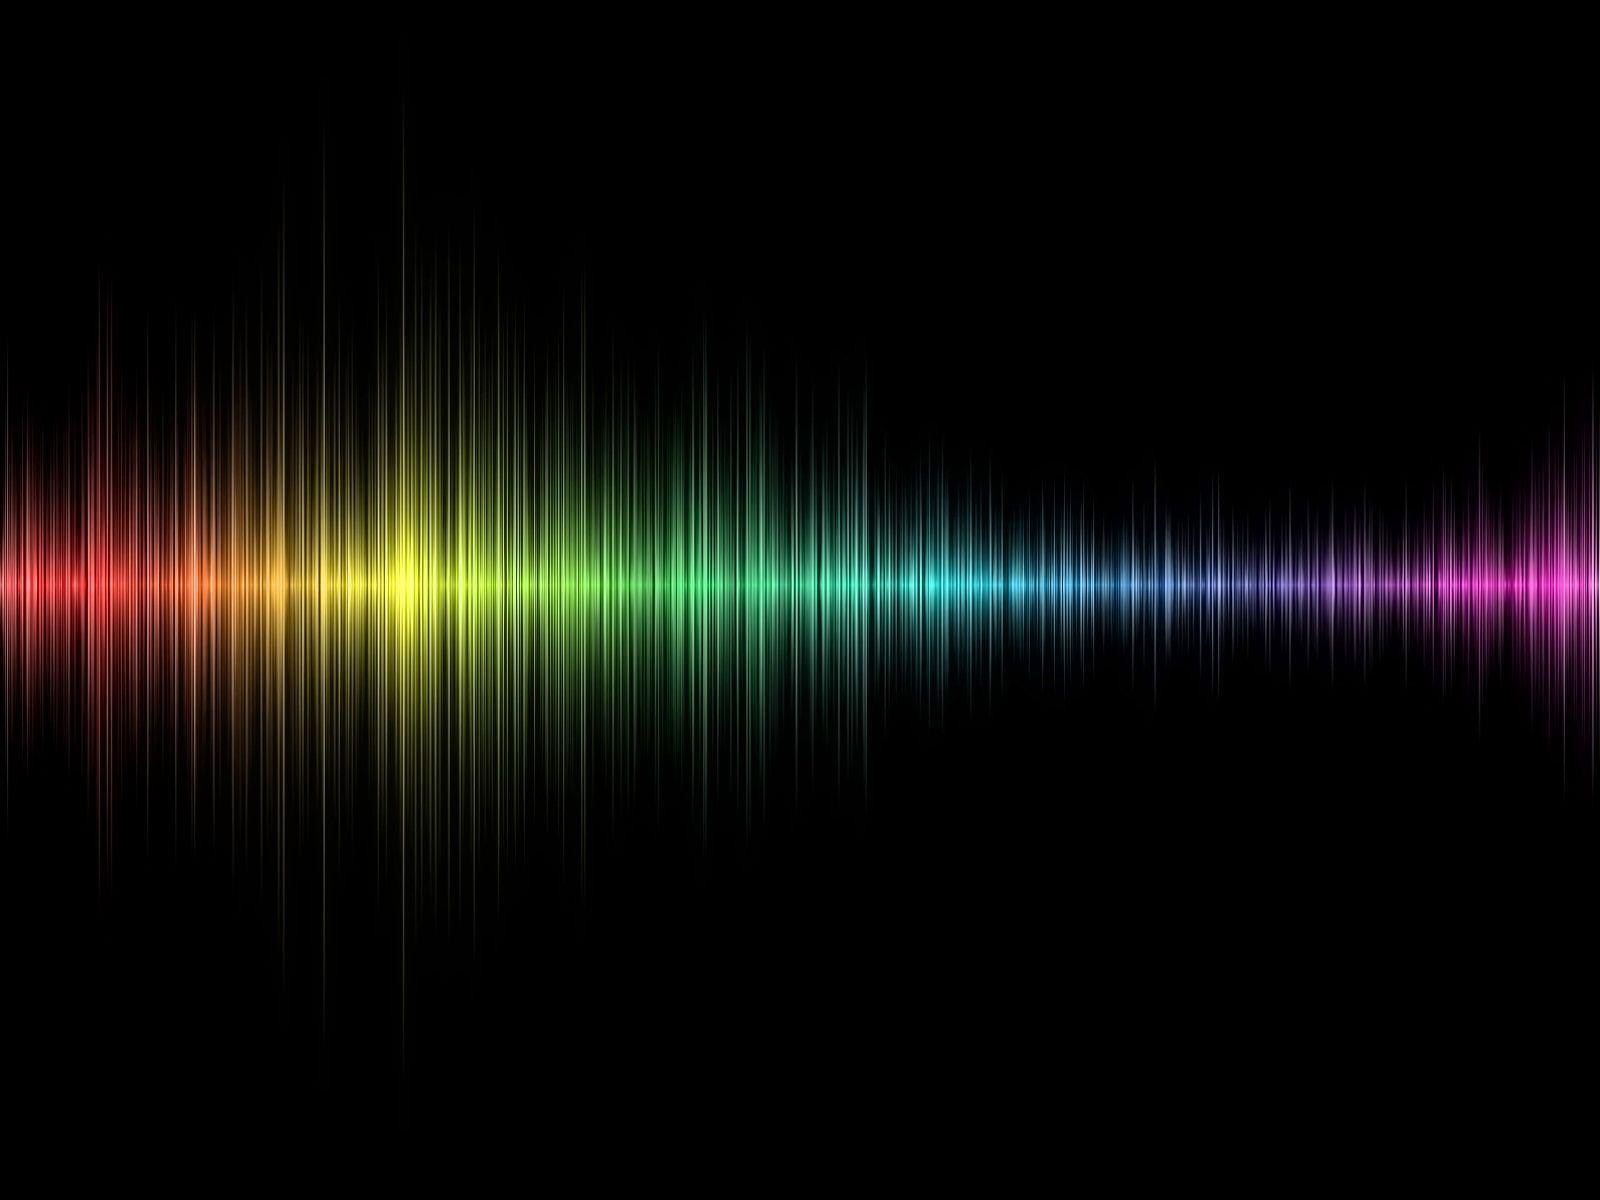 Wallpaper For > Cool Sound Waves Wallpaper. Waves wallpaper, Sound waves, Music wallpaper